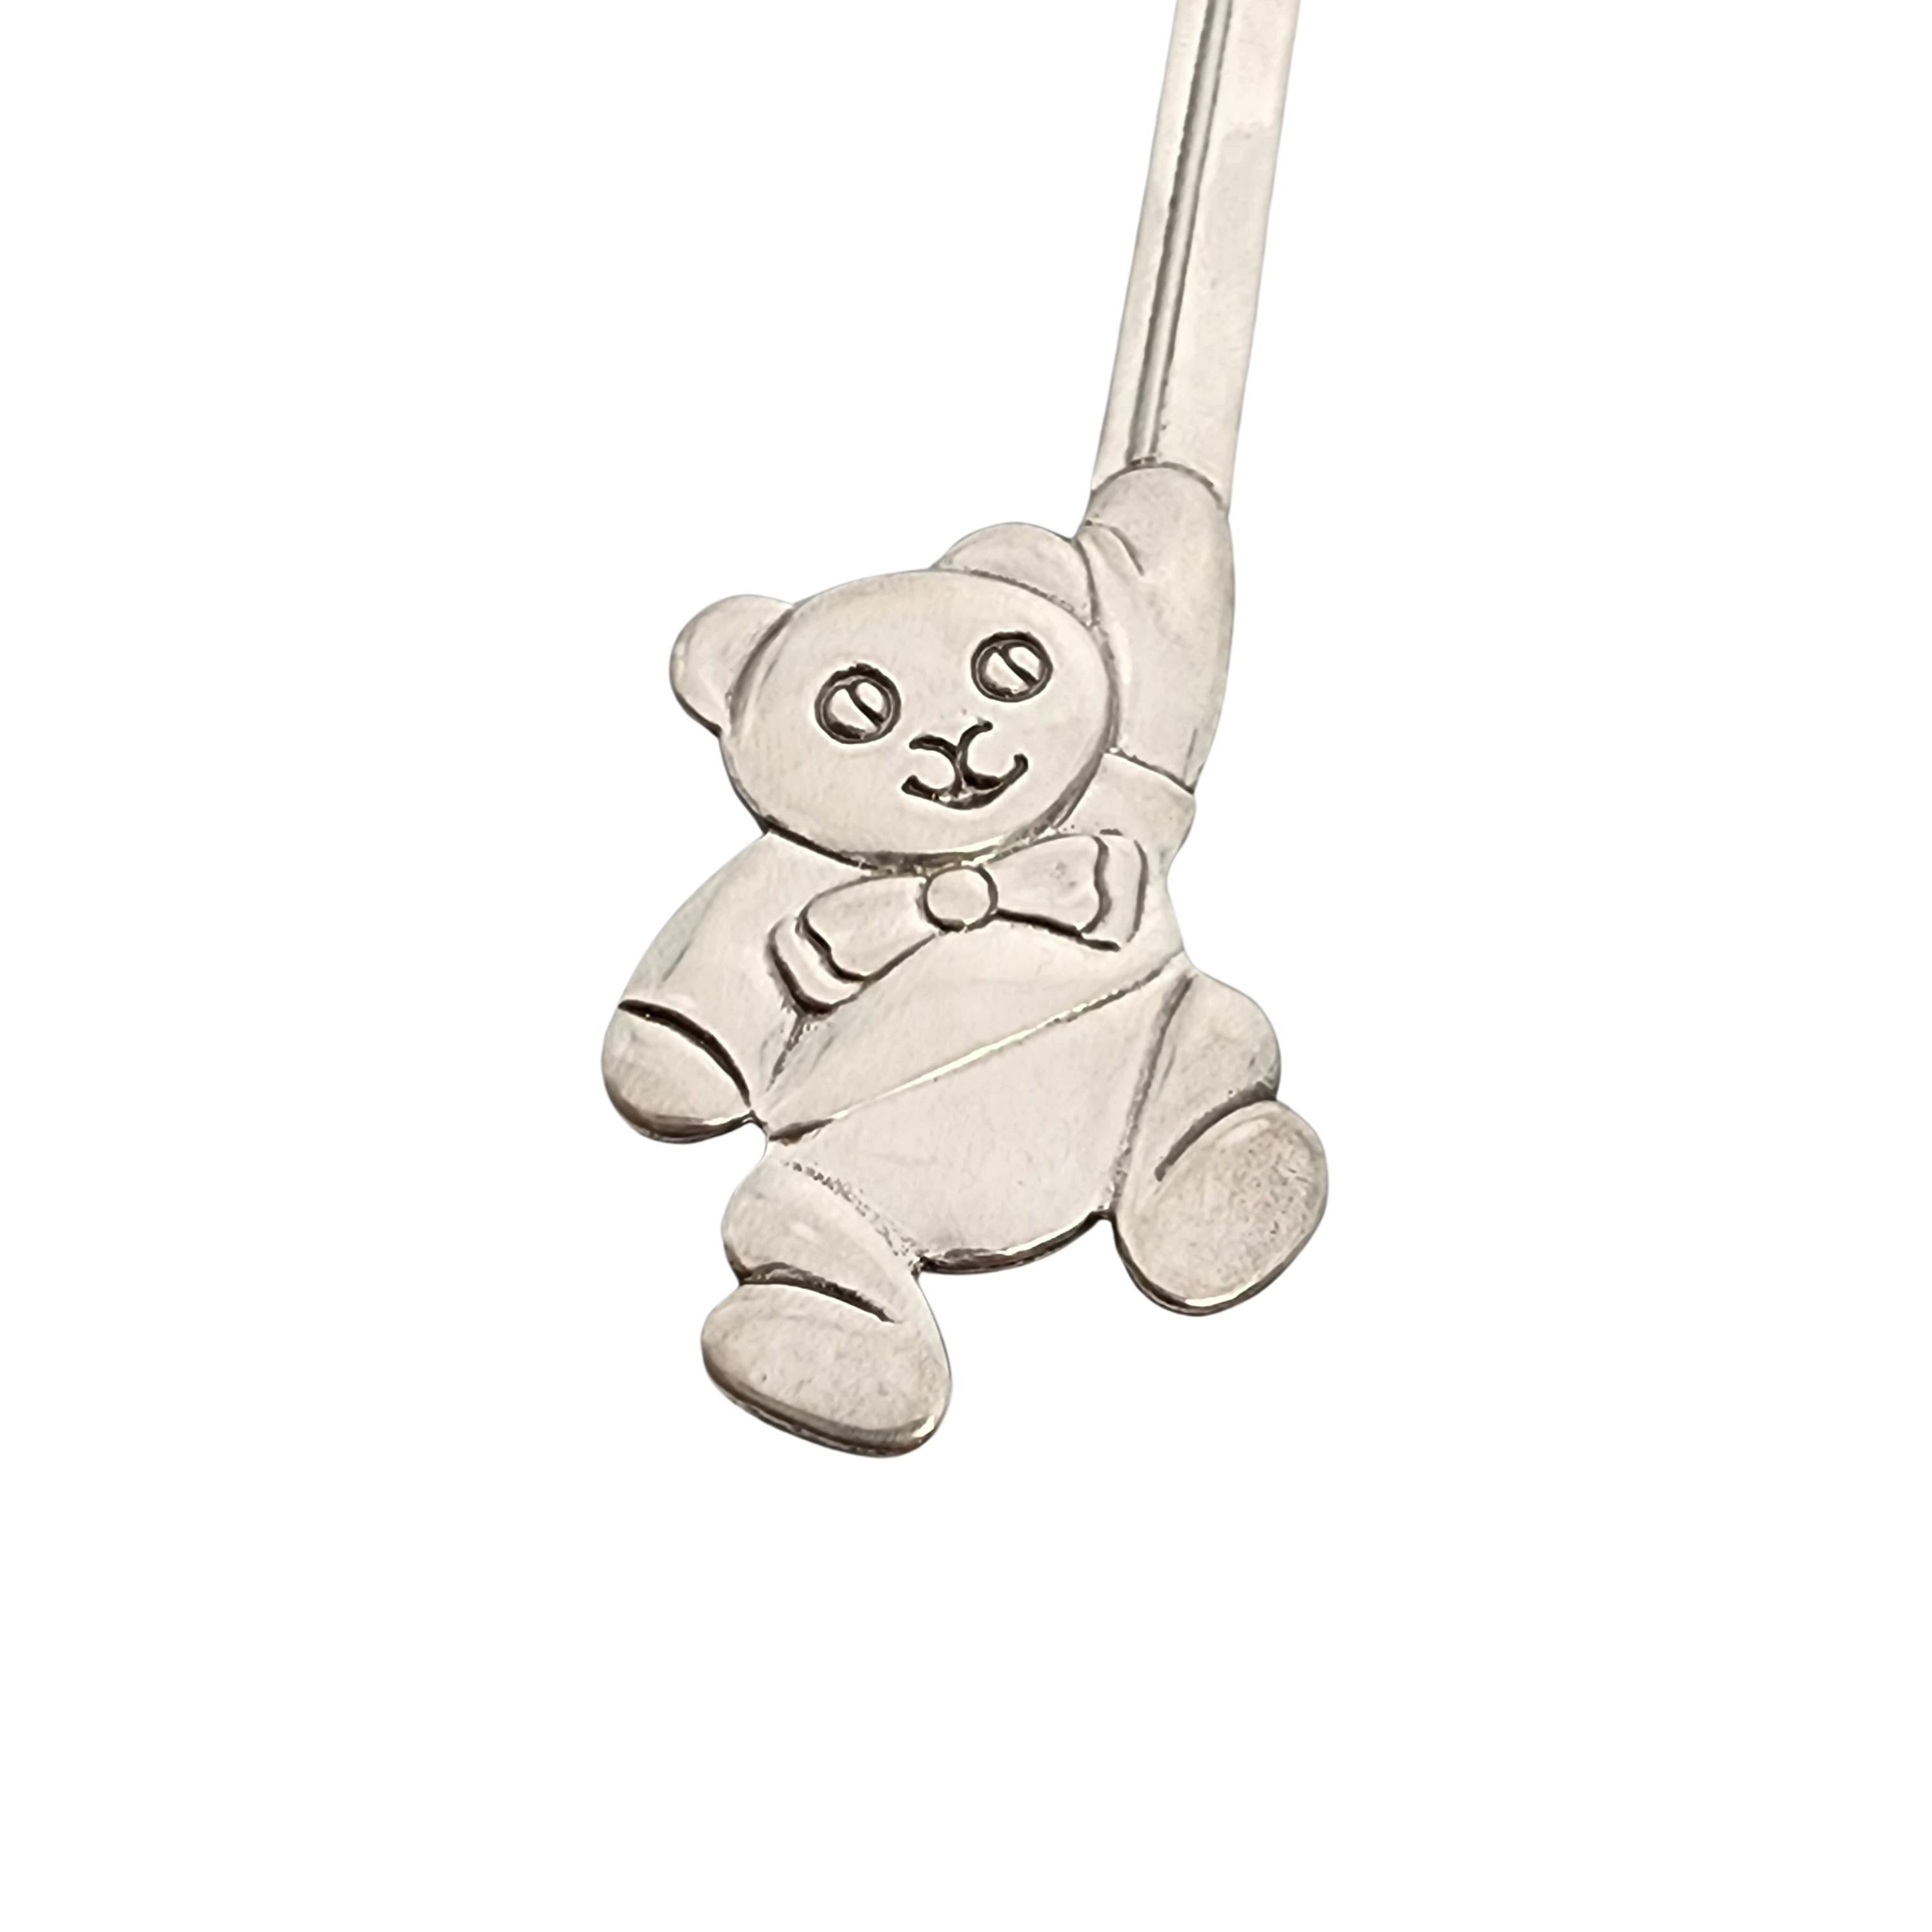 Women's or Men's Tiffany & Co Sterling Silver Teddy Bear Baby/Child Spoon w/Box and Pouch #17258 For Sale